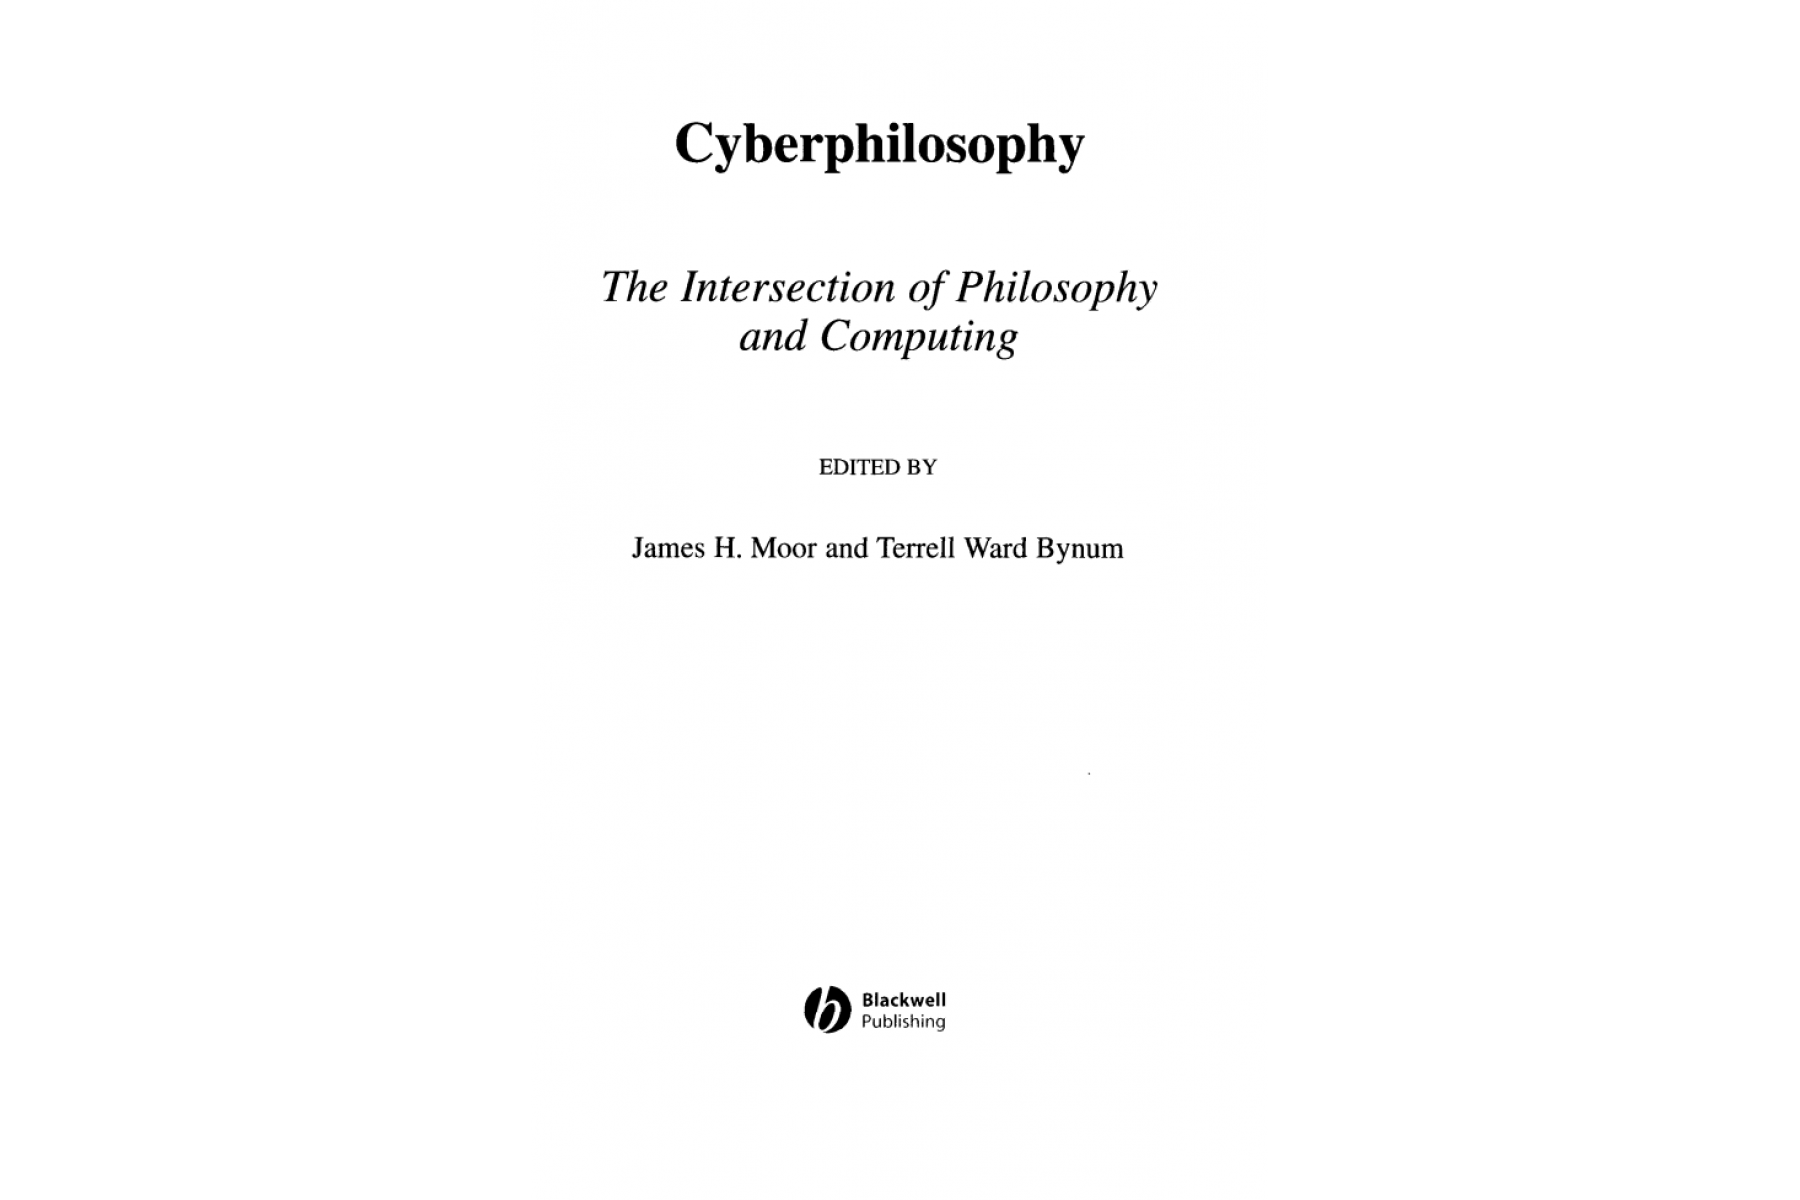 CyberPhilosophy Intersection: The Intersection of Philosophy and Computing